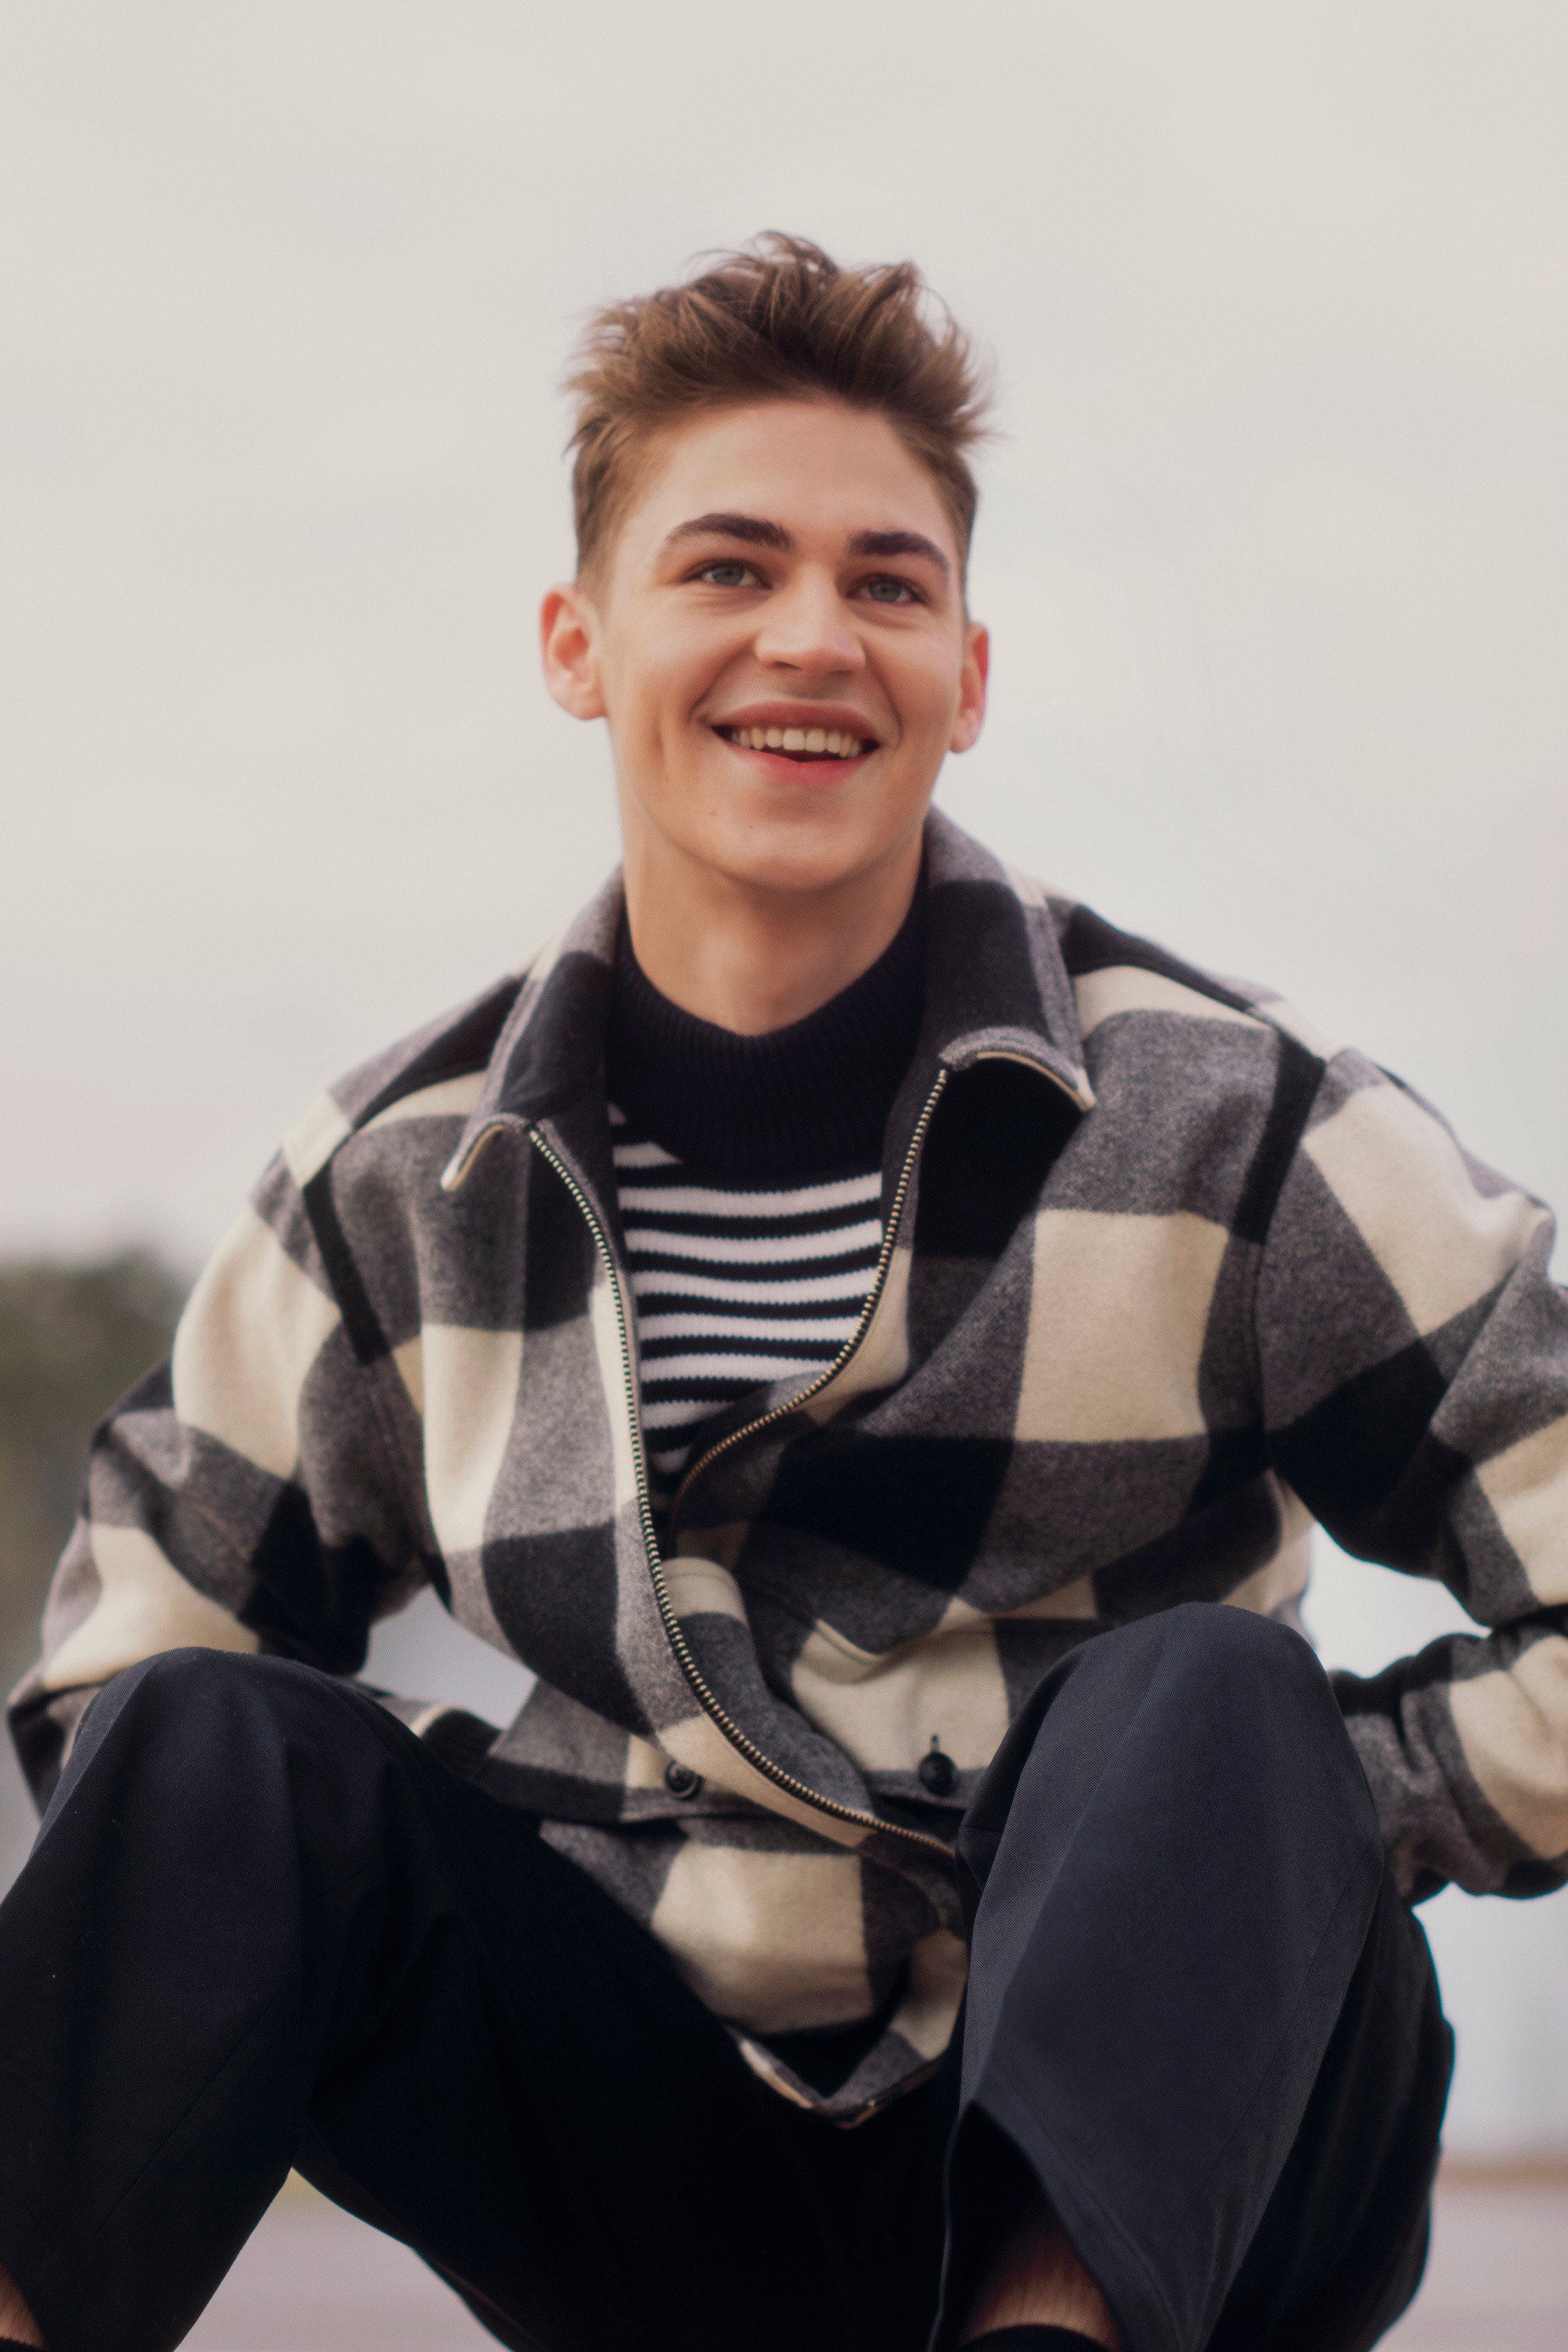 Woolrich Chooses Hero Fiennes Tiffin to Promote Fall